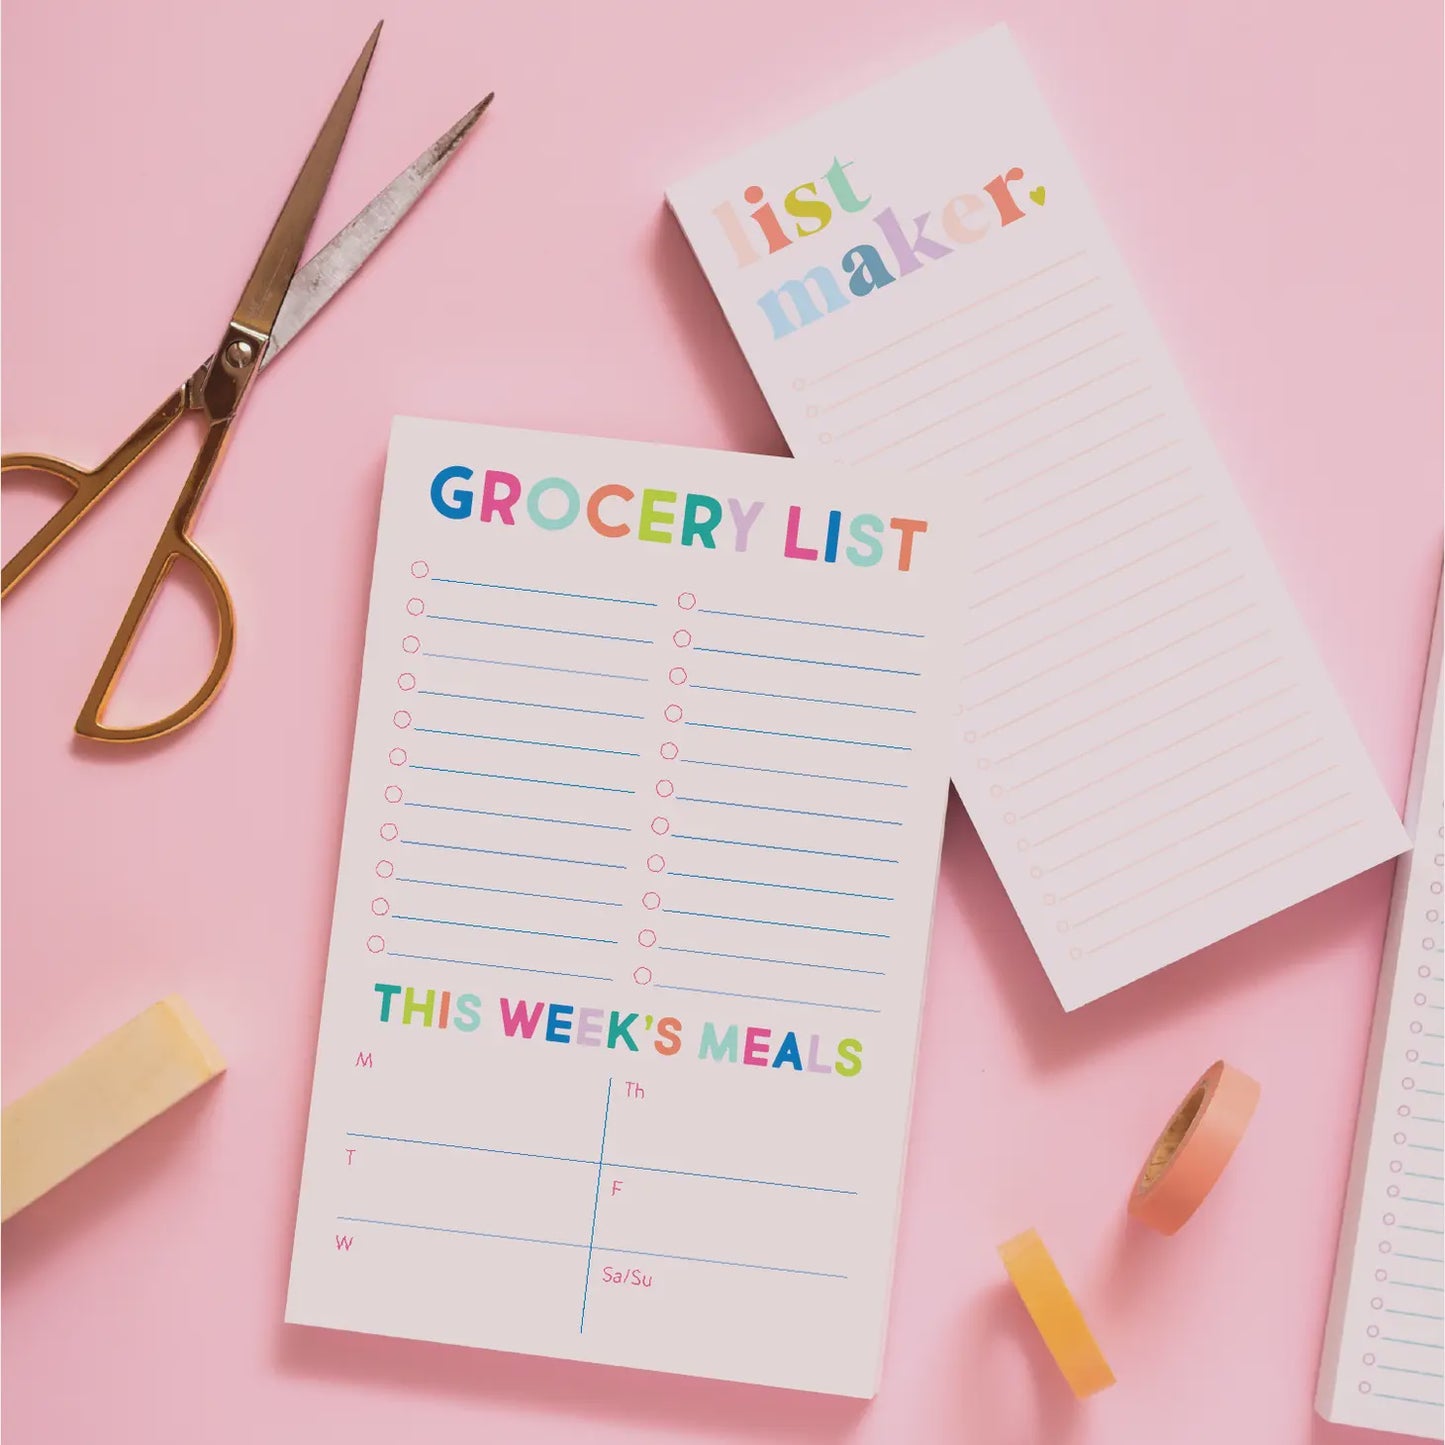 Grocery List and Meal Plan Notepad